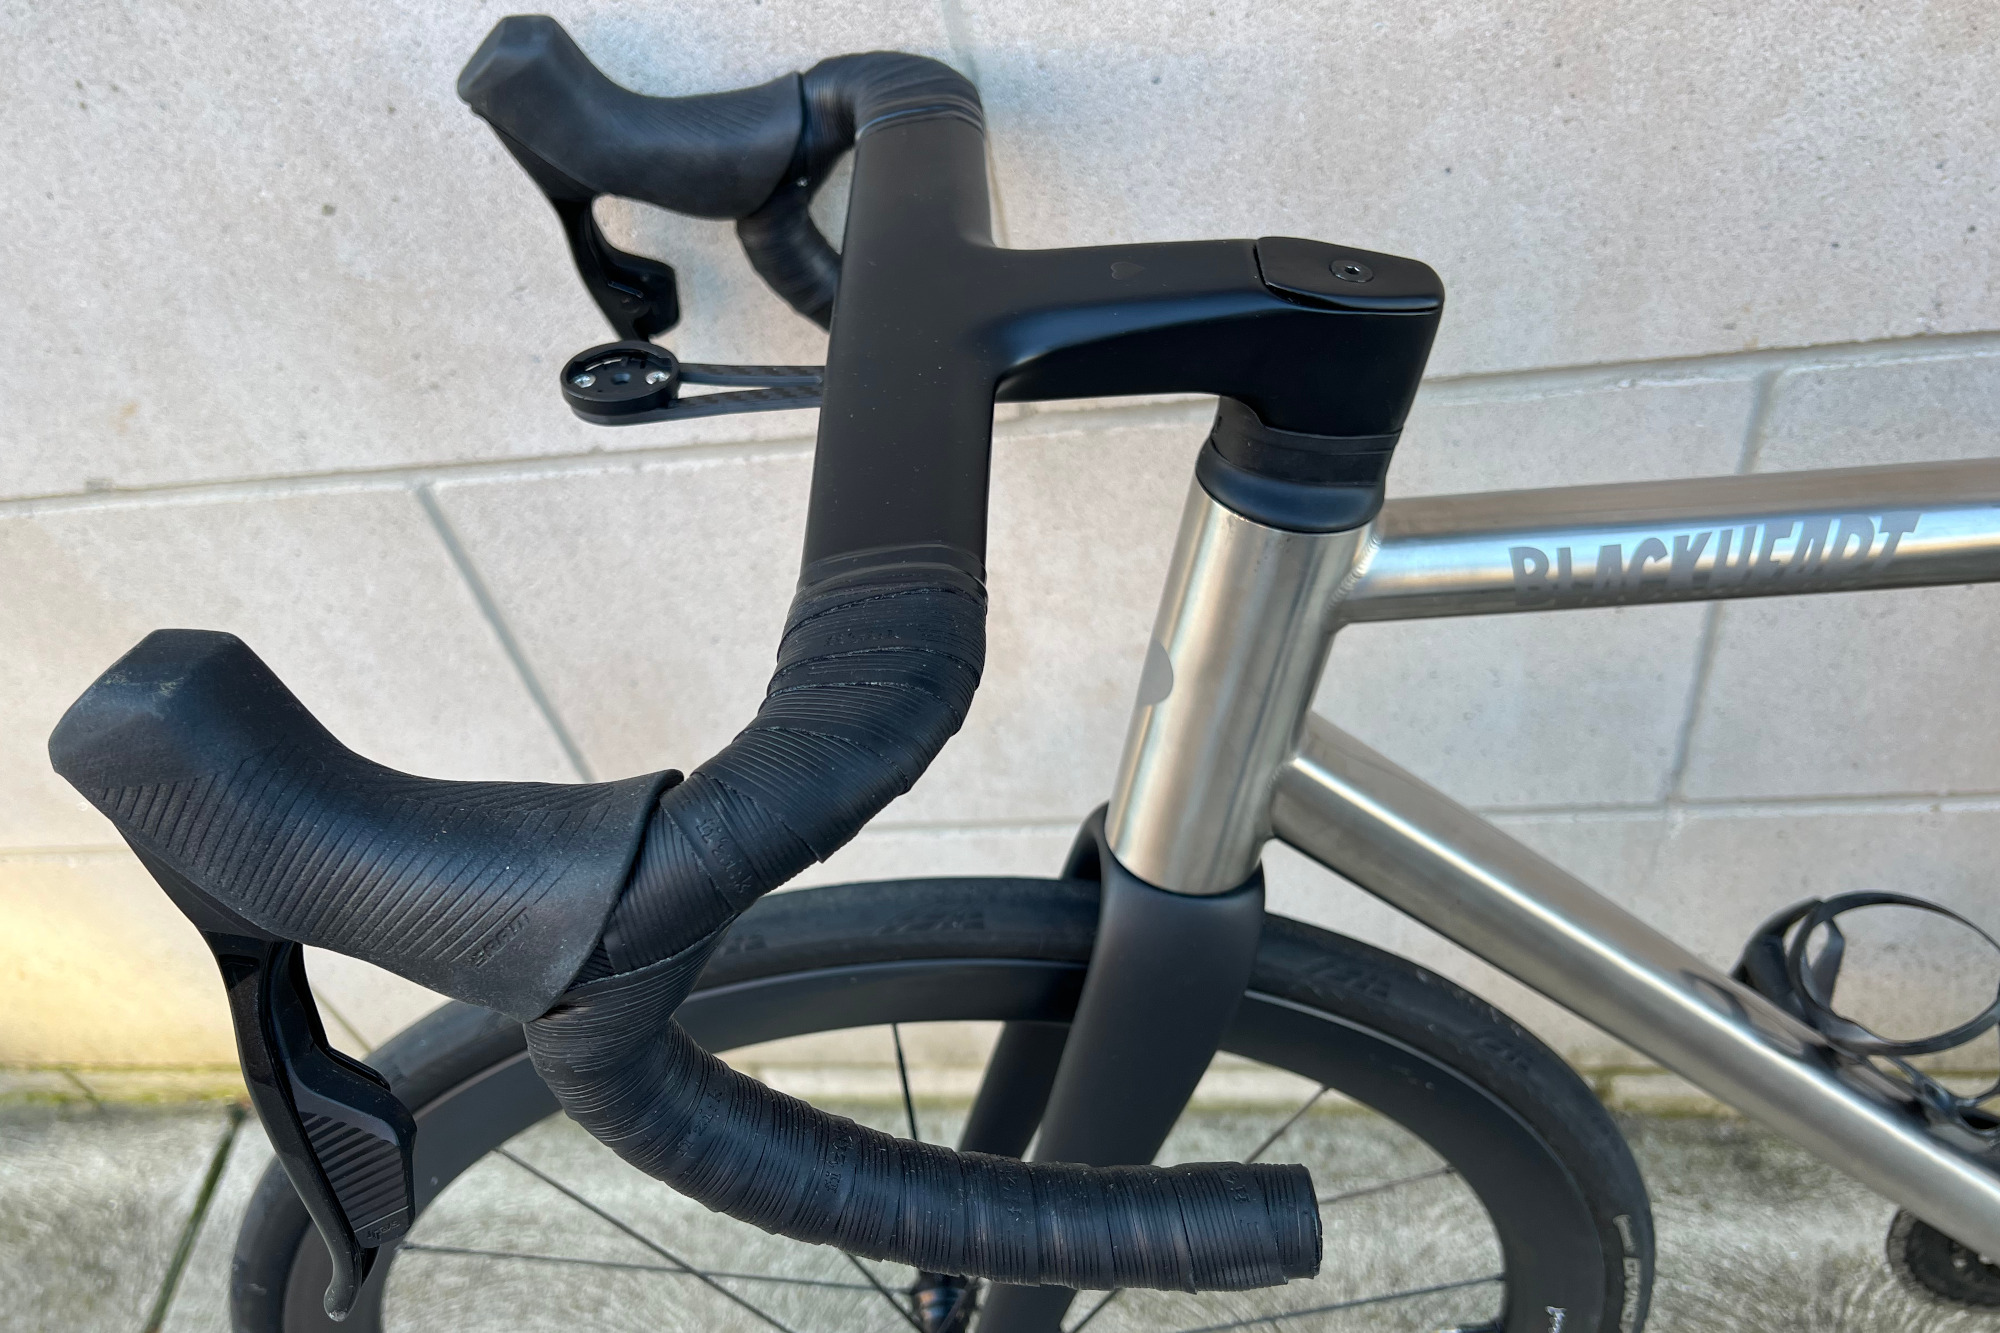 Blackheart Bike Co's Road Ti reviewed: Fully internal routing, Kamm-tail tube shapes, and a minimalist and clean look give the Blackheart Road Ti a contemporary appearance